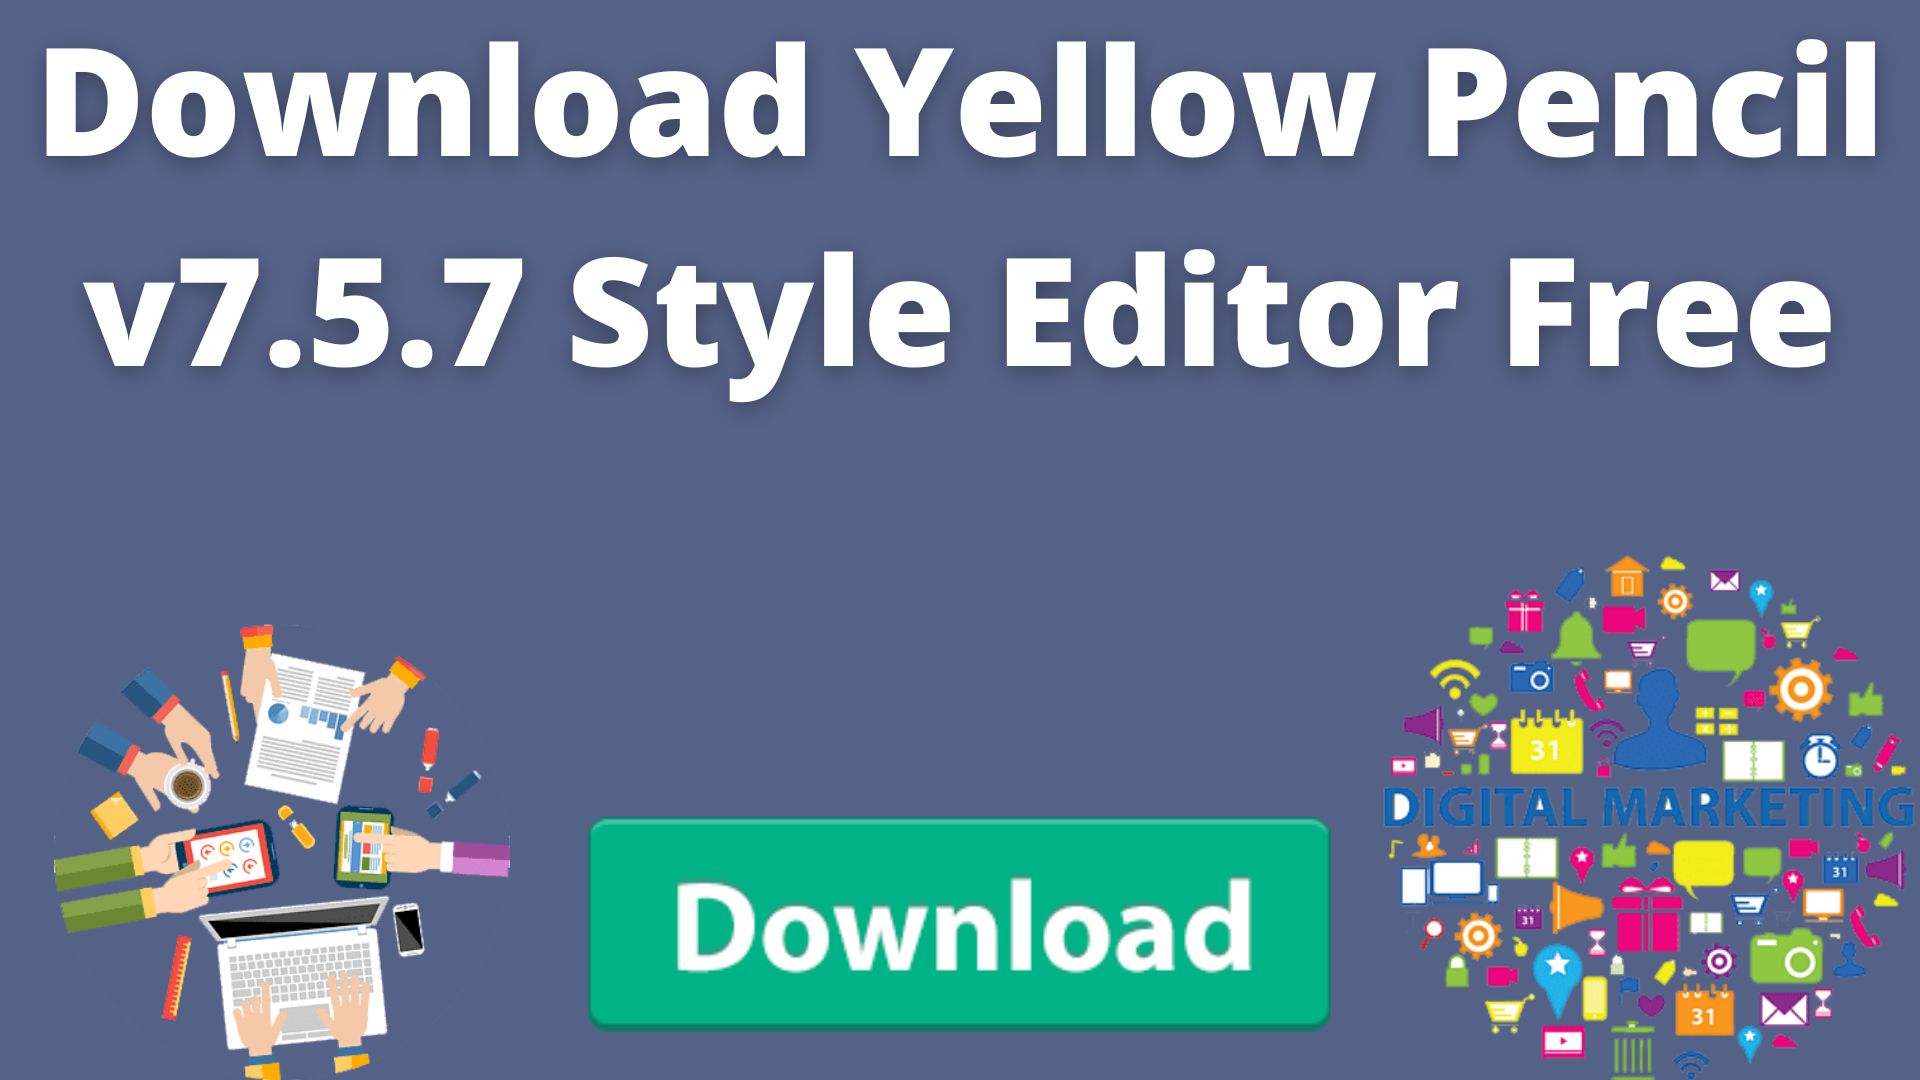 Download yellow pencil v7. 5. 7 style editor free